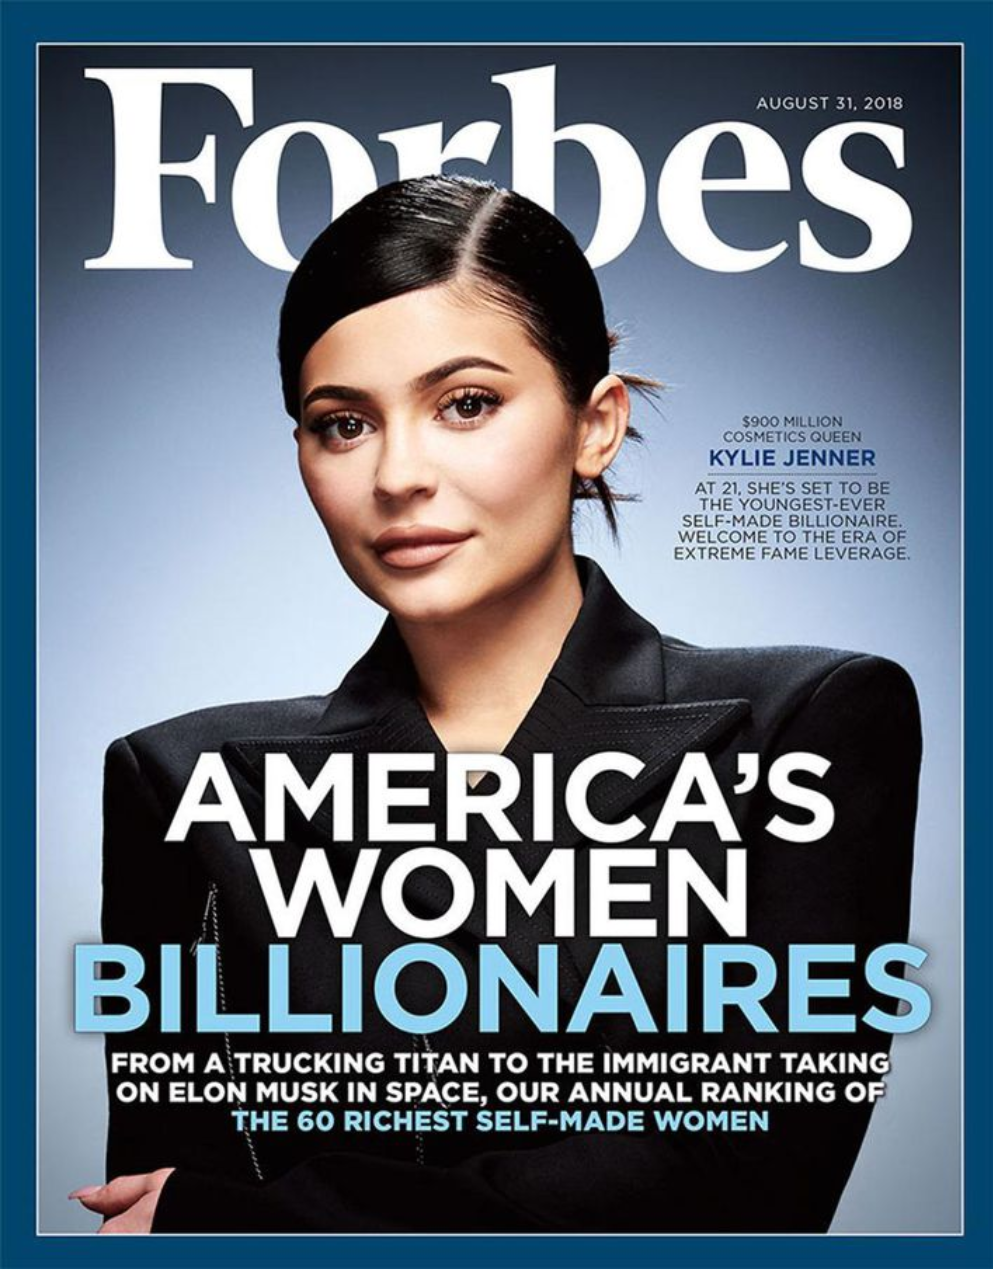 Is Kylie Jenner really a self-made billionaire?